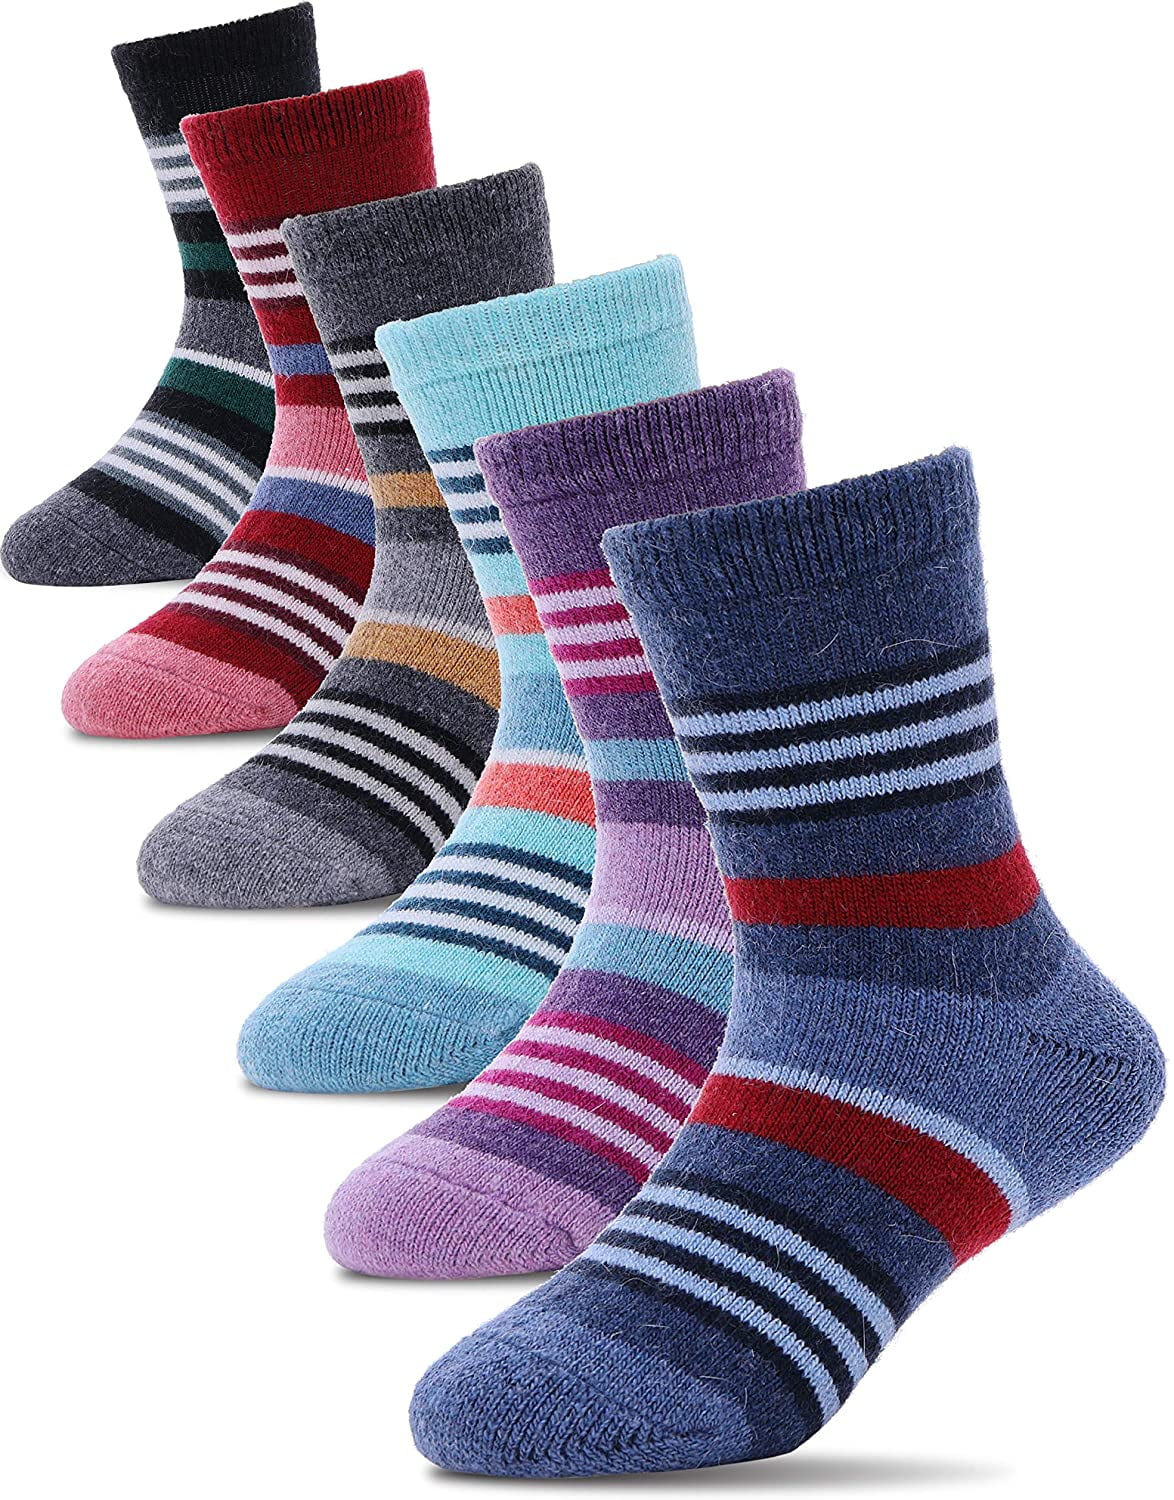 Details about   Boys Girls Wool Socks Warm Thick Thermal Cotton Winter Crew Socks For Child Kid 